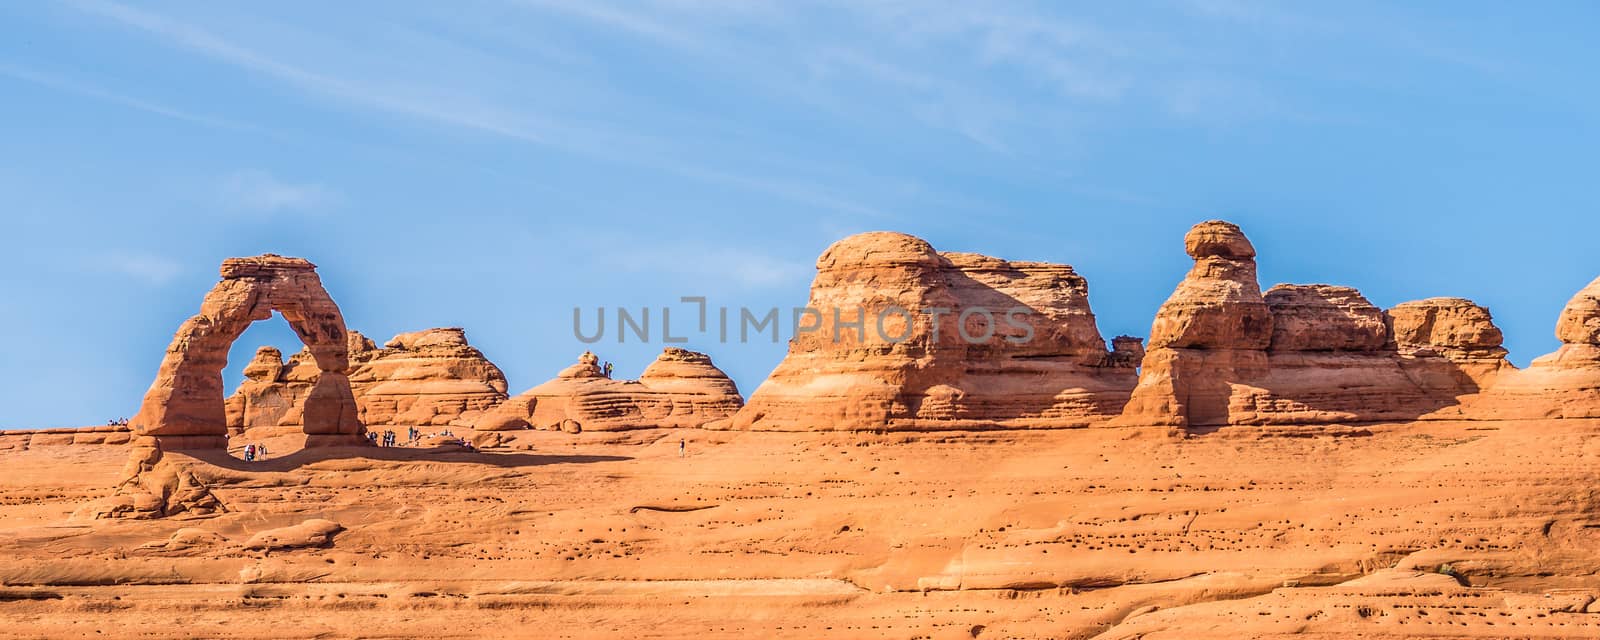 Arches National Park  Moab  Utah  USA by digidreamgrafix